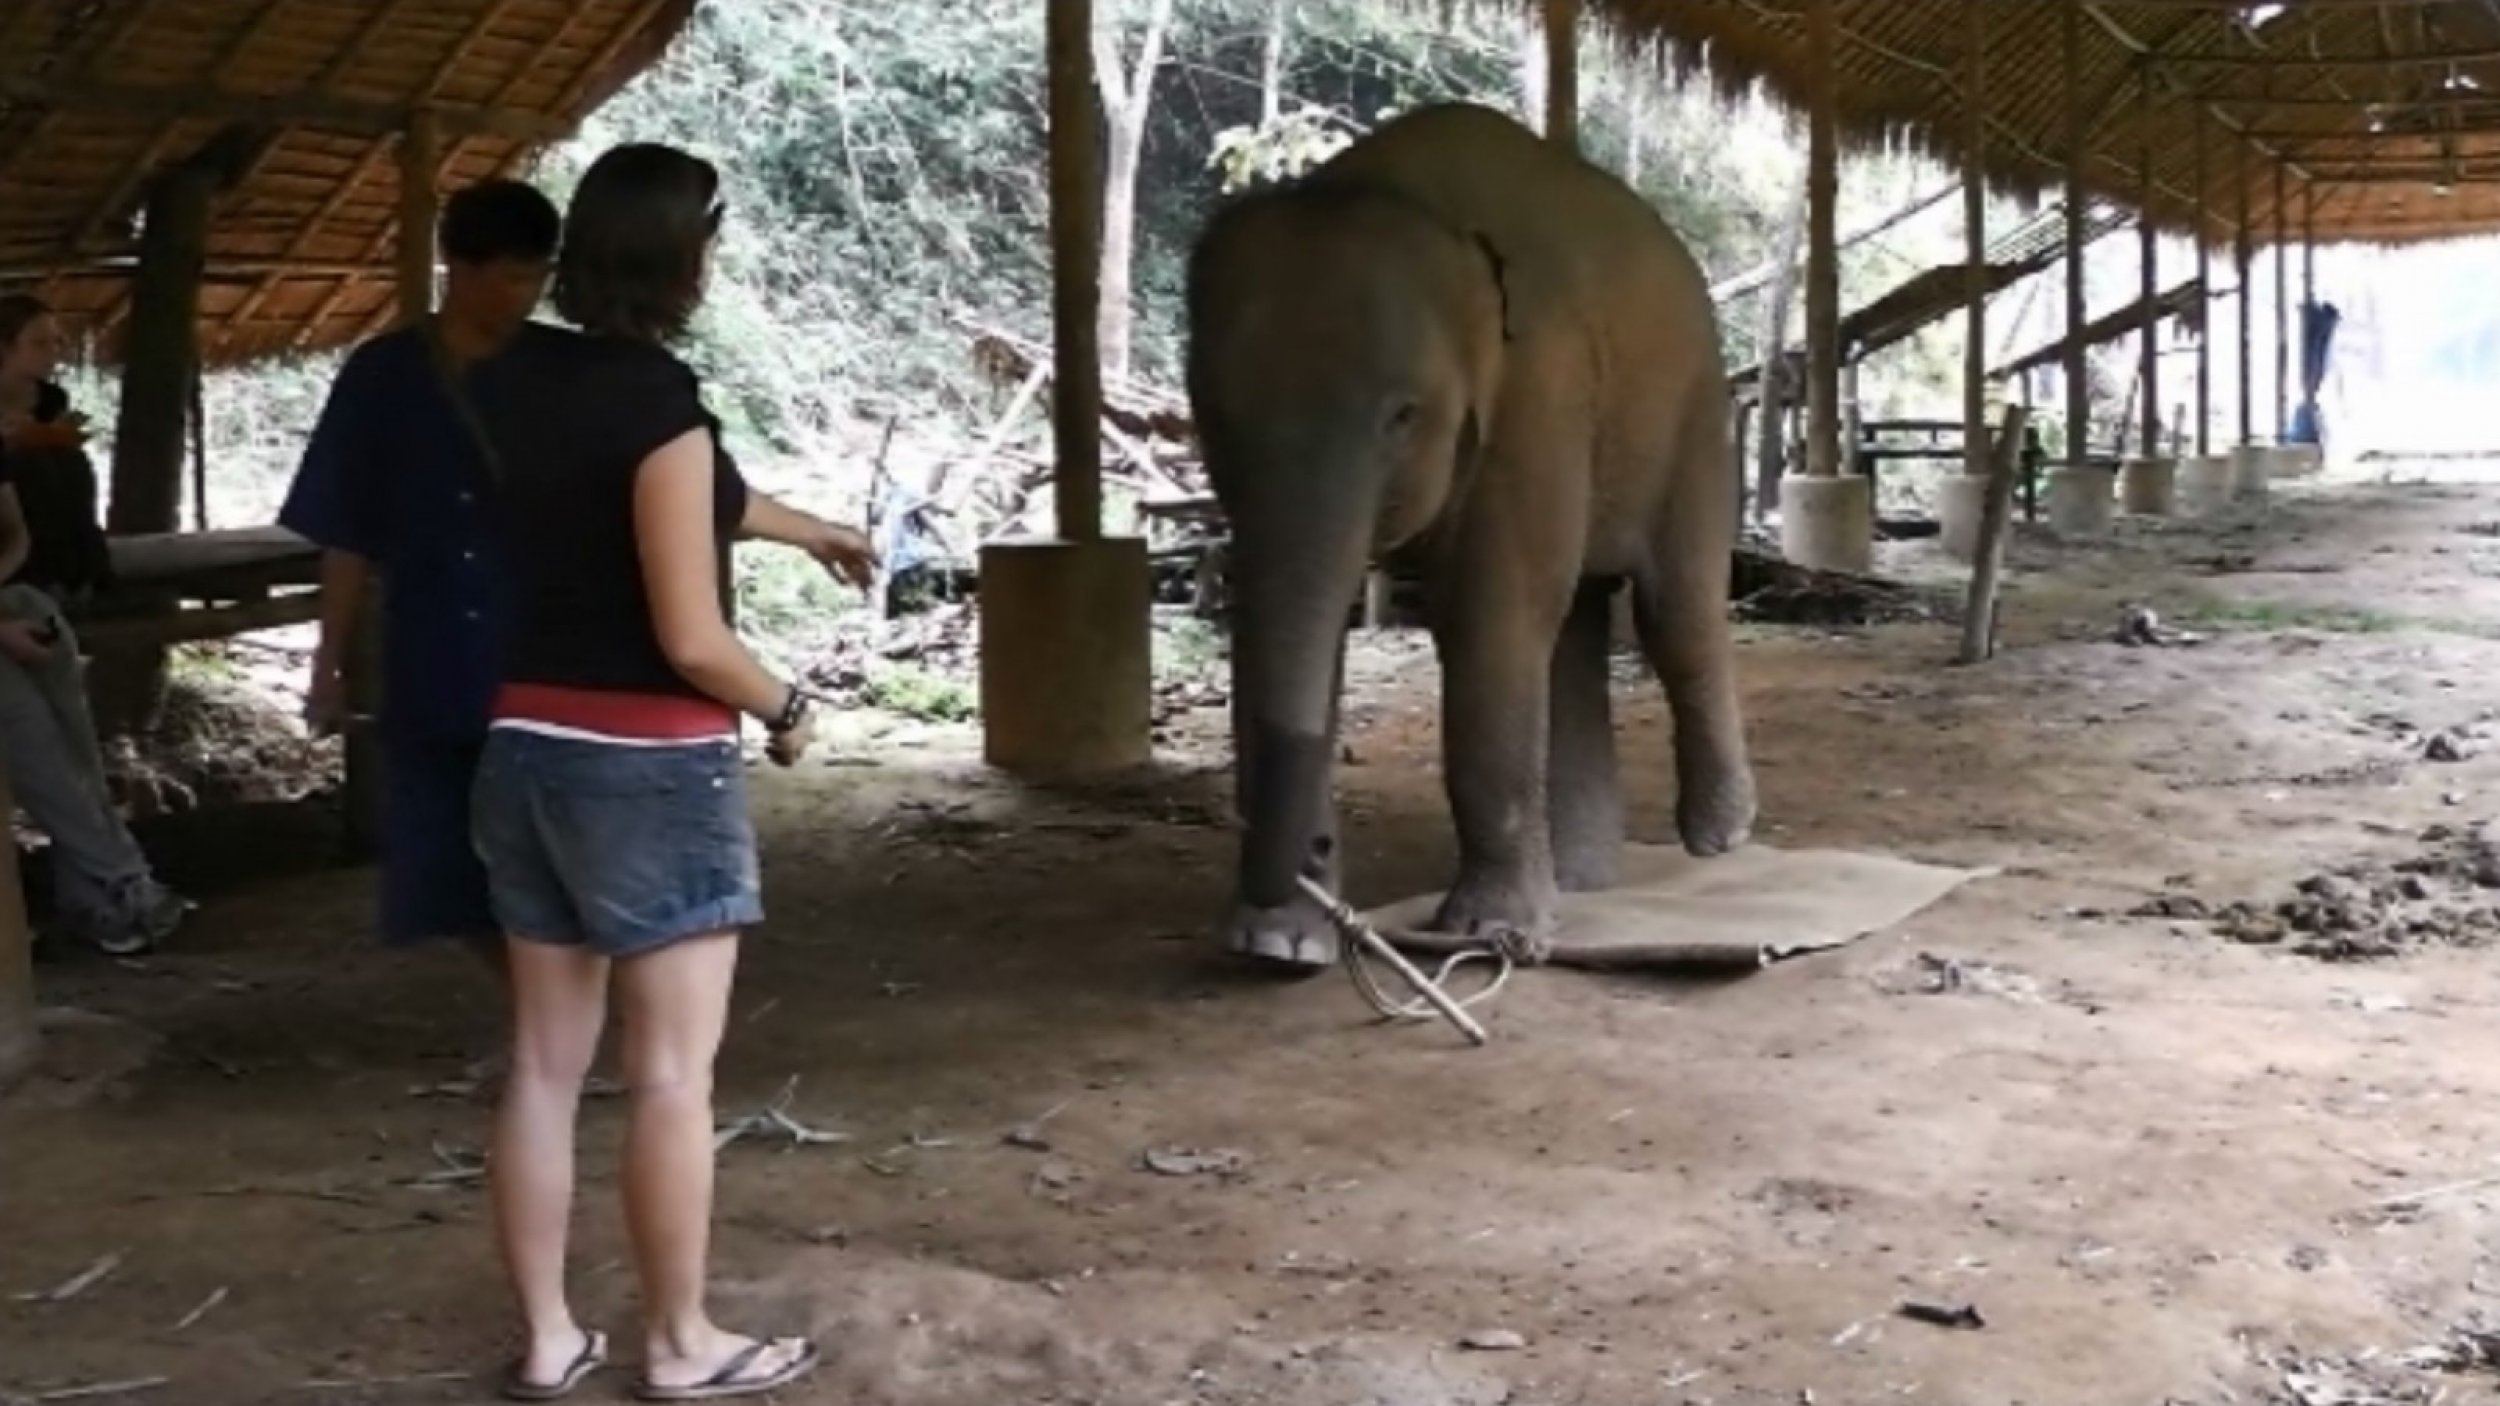 Elephants are aware of their own bodies